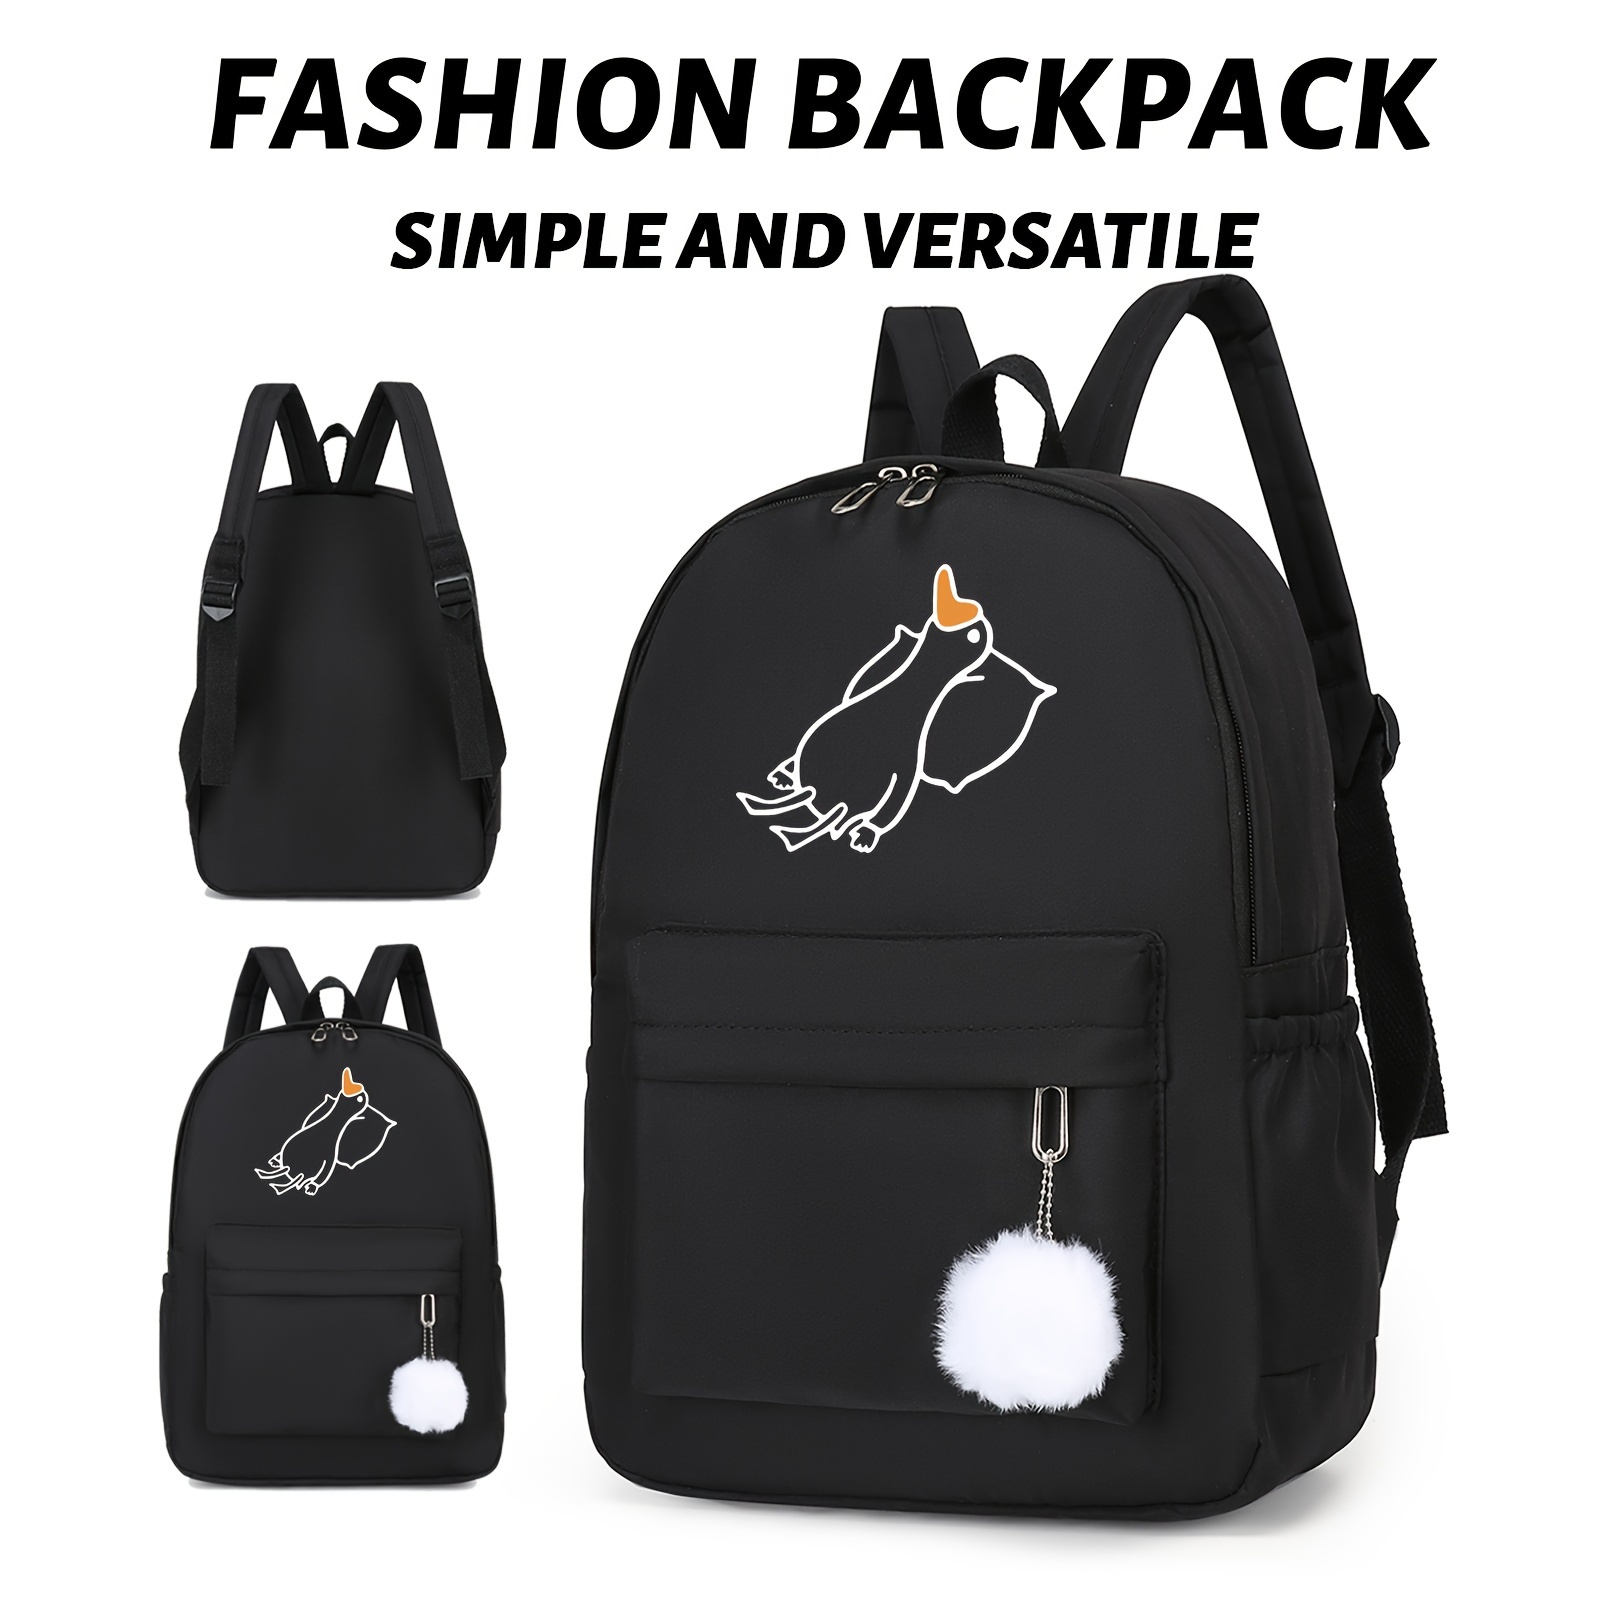 

Duck Pillow Print Stylish And Versatile Black Backpack, Perfect For Travel With Its Large Capacity, Multi Functional Backpack, Suitable For Women And Men, Can Be Used For Various Purposes